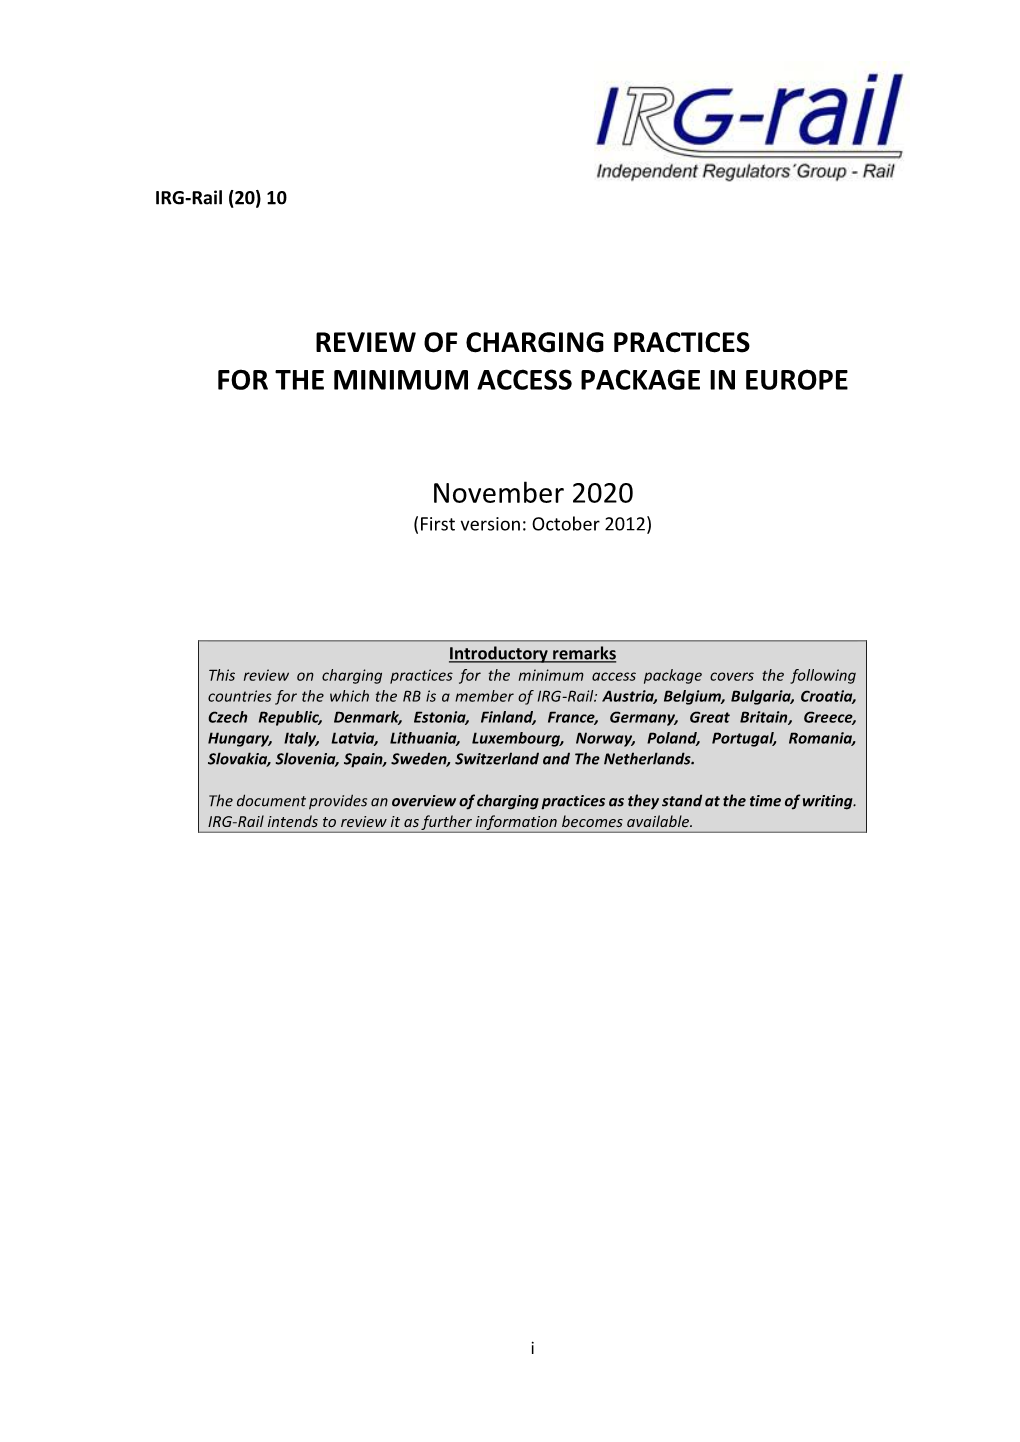 Overview of Charging Practices for the Minimum Access Package in Europe